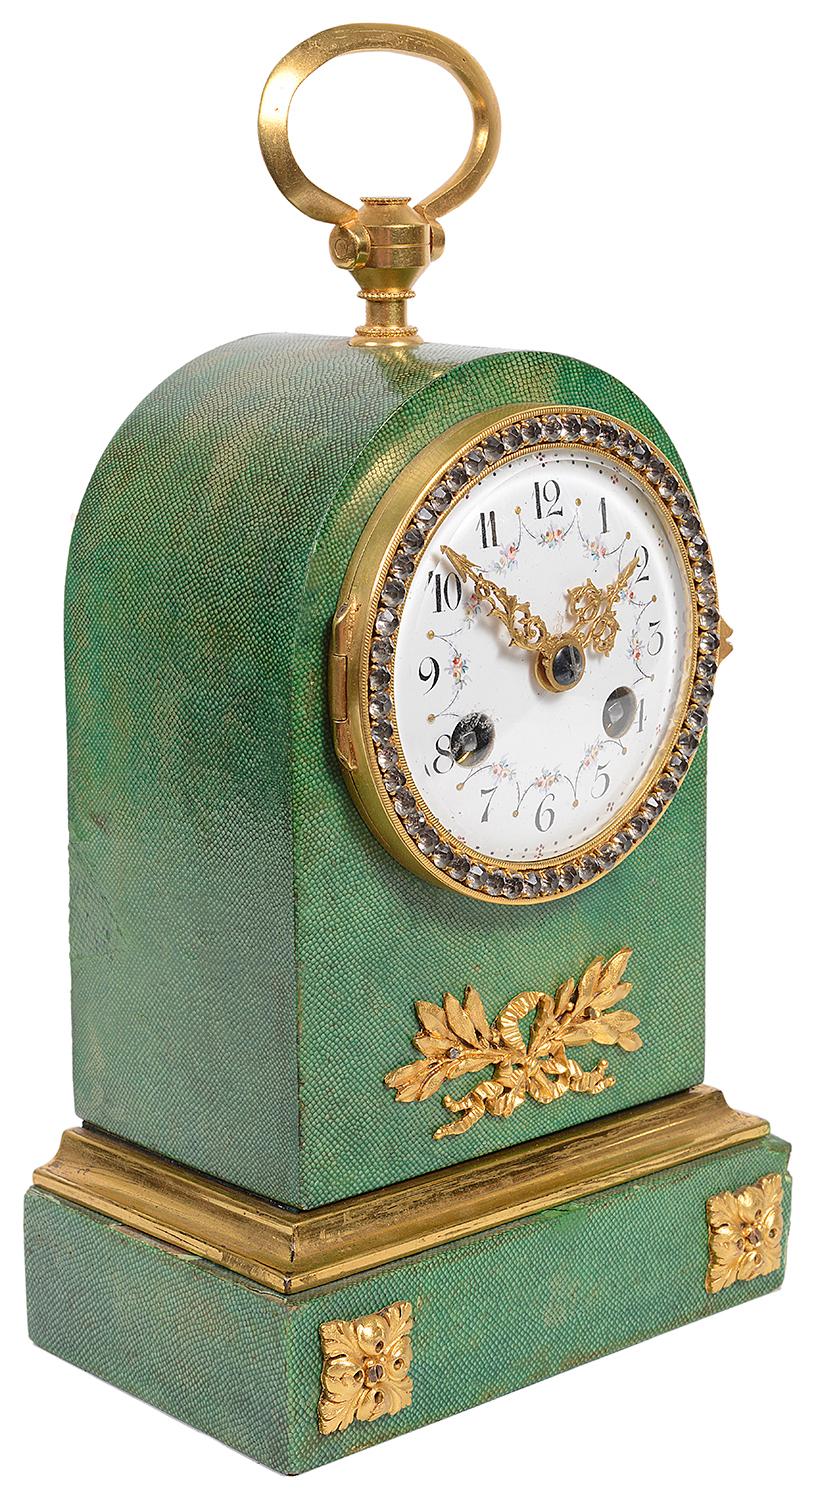 A very pleasing late 19th century French arched top mantel, carriage clock in green Shagreen, with a gilded ormolu handle to the top, crystal jewels to the bezel, an eight day duration chiming clock movement, gilded ormolu leaf and ribbon mount and